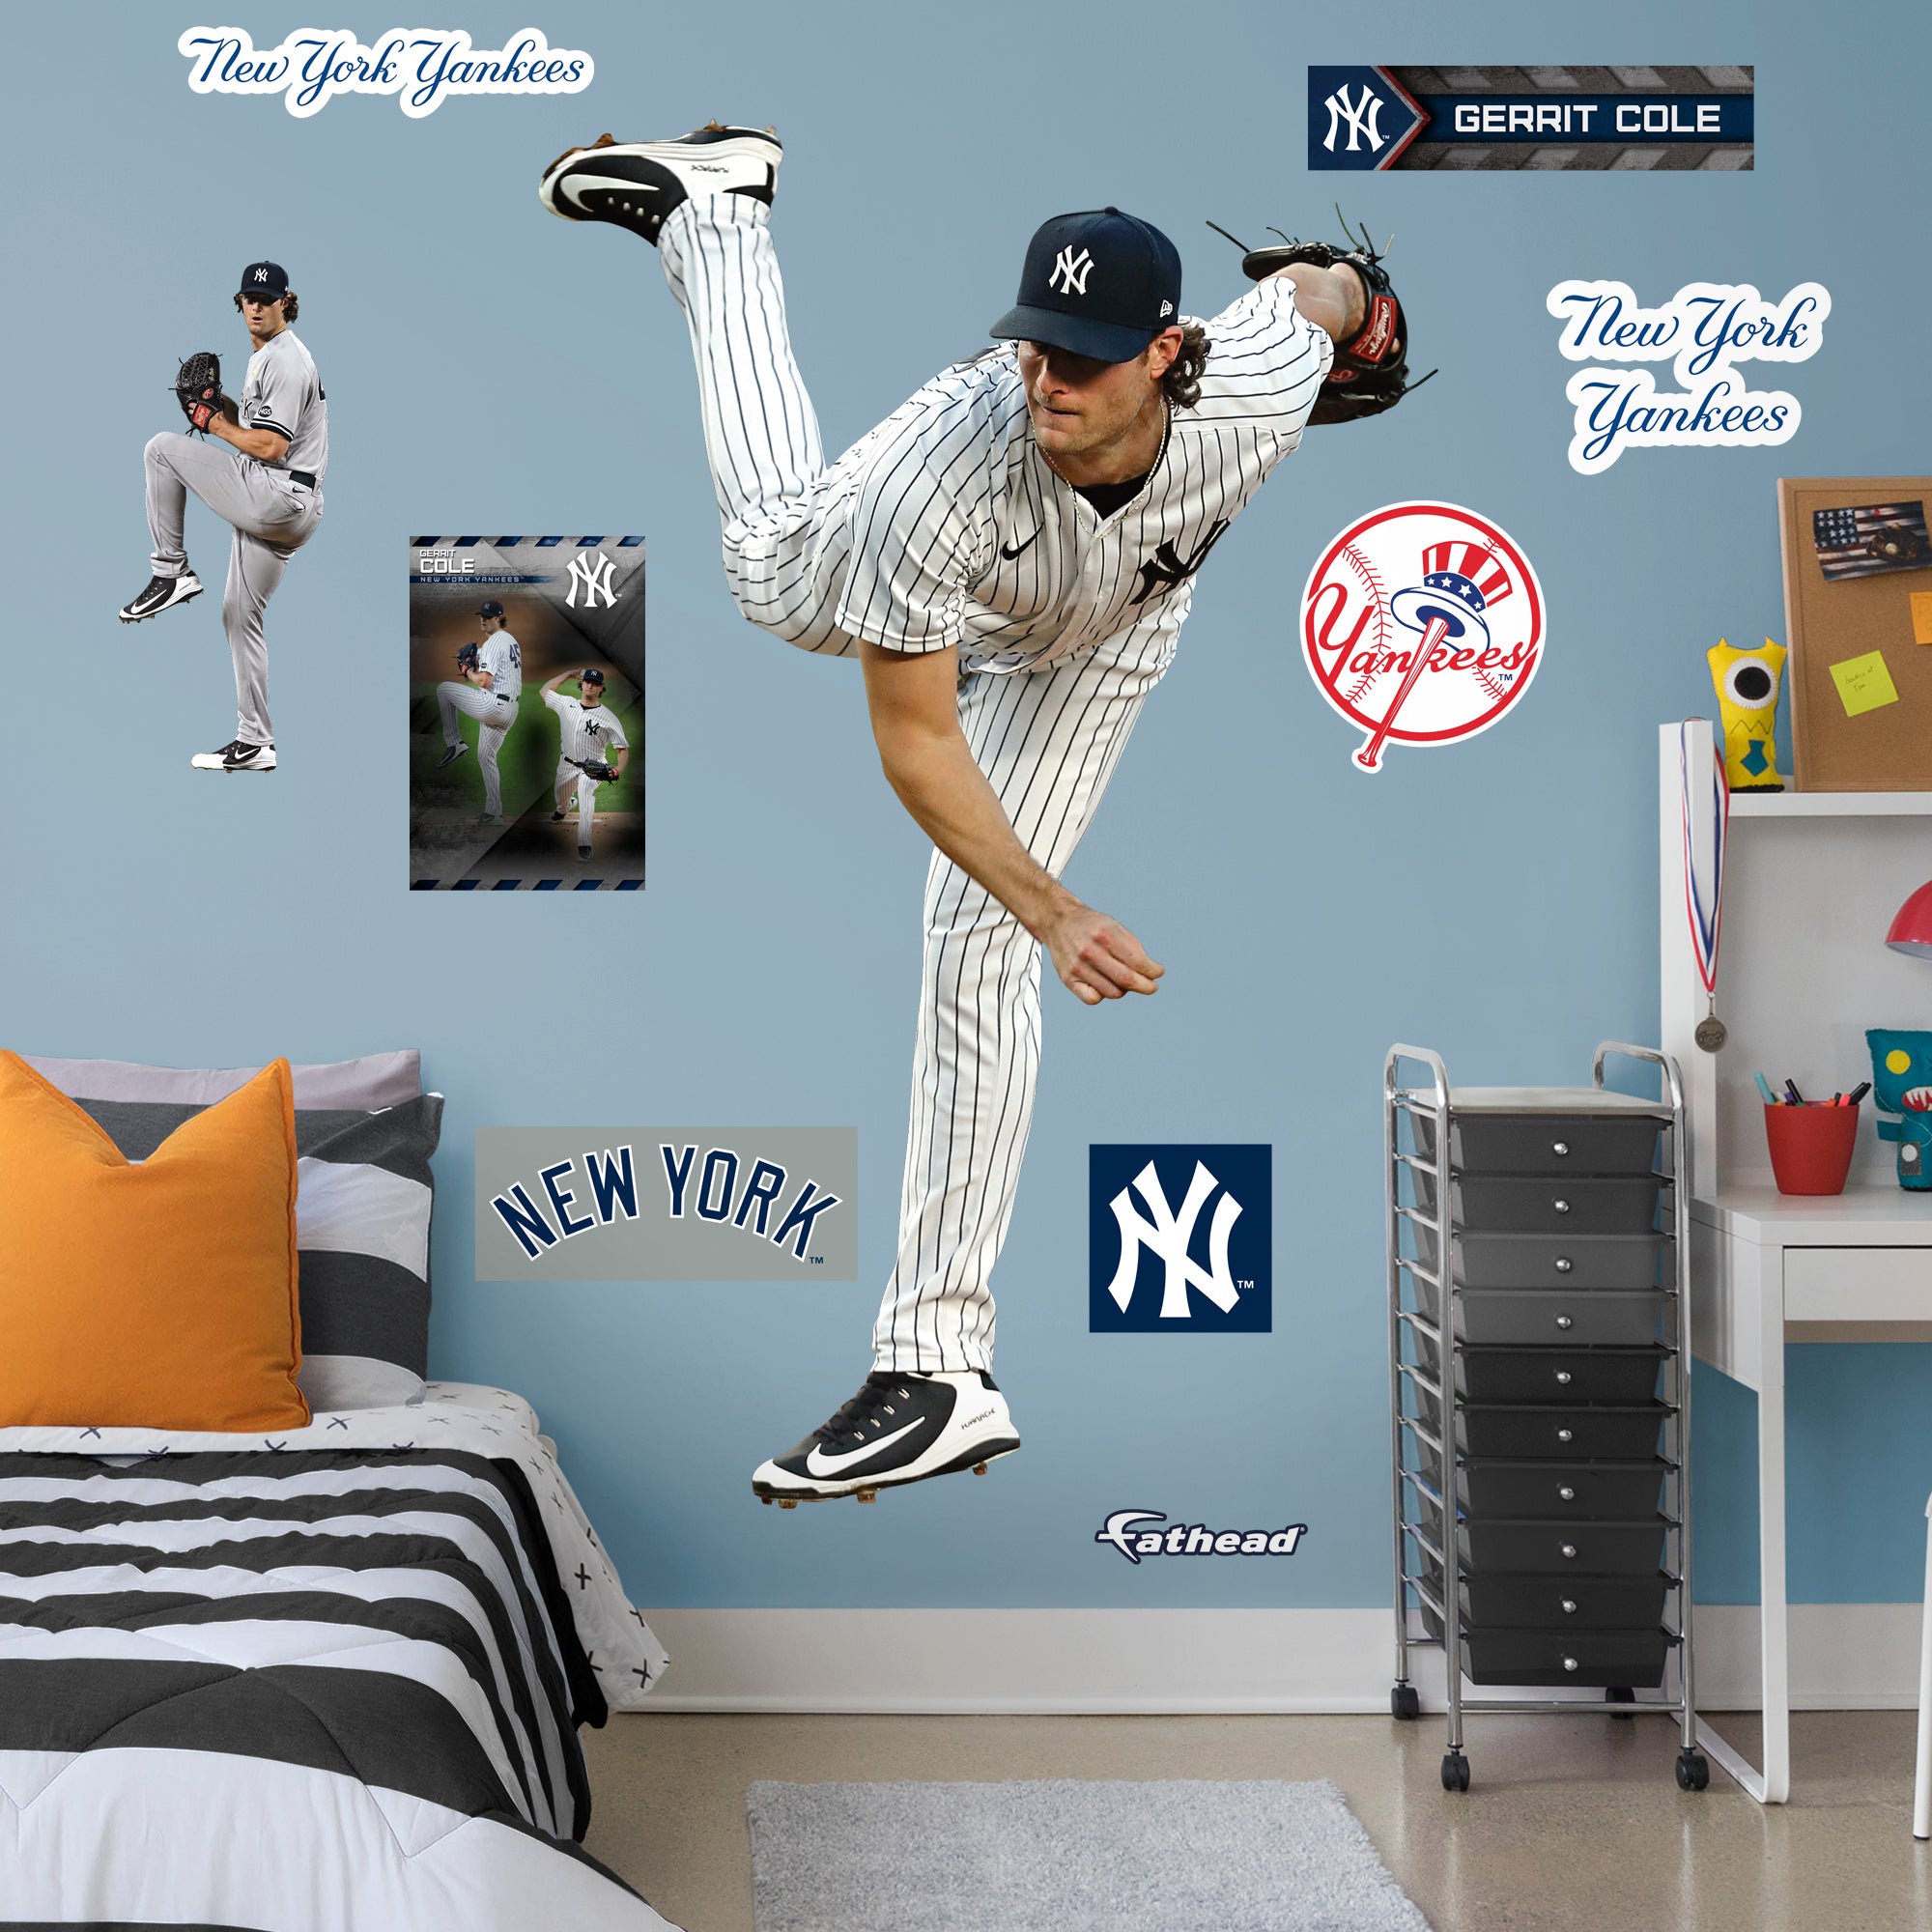 Gerrit Cole 2020 - Officially Licensed MLB Removable Wall Decal Giant Athlete + 2 Decals (33"W x 50"H) by Fathead | Vinyl